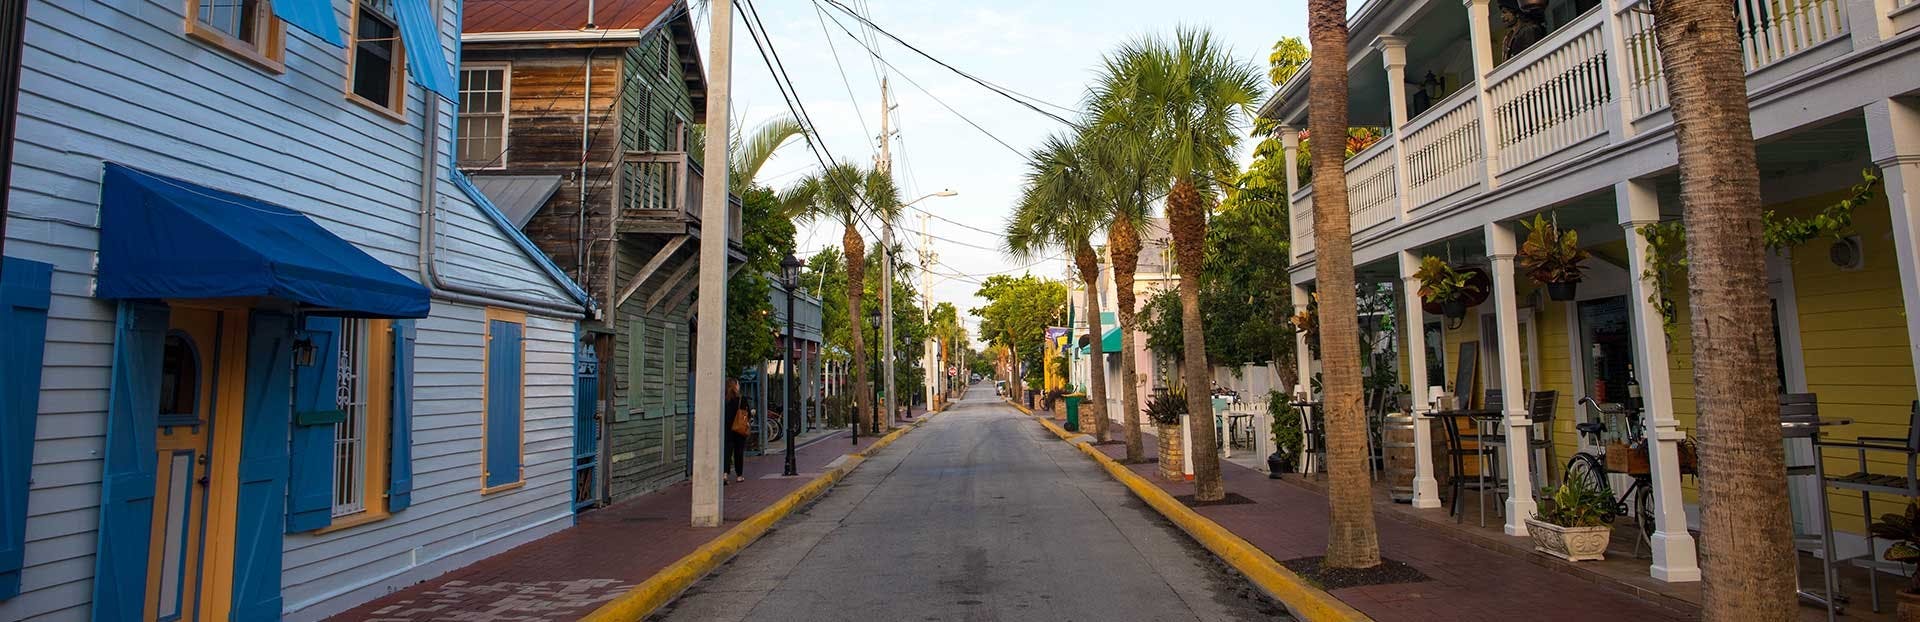 Self guided audio tour of Key West’s old town treasures Musement